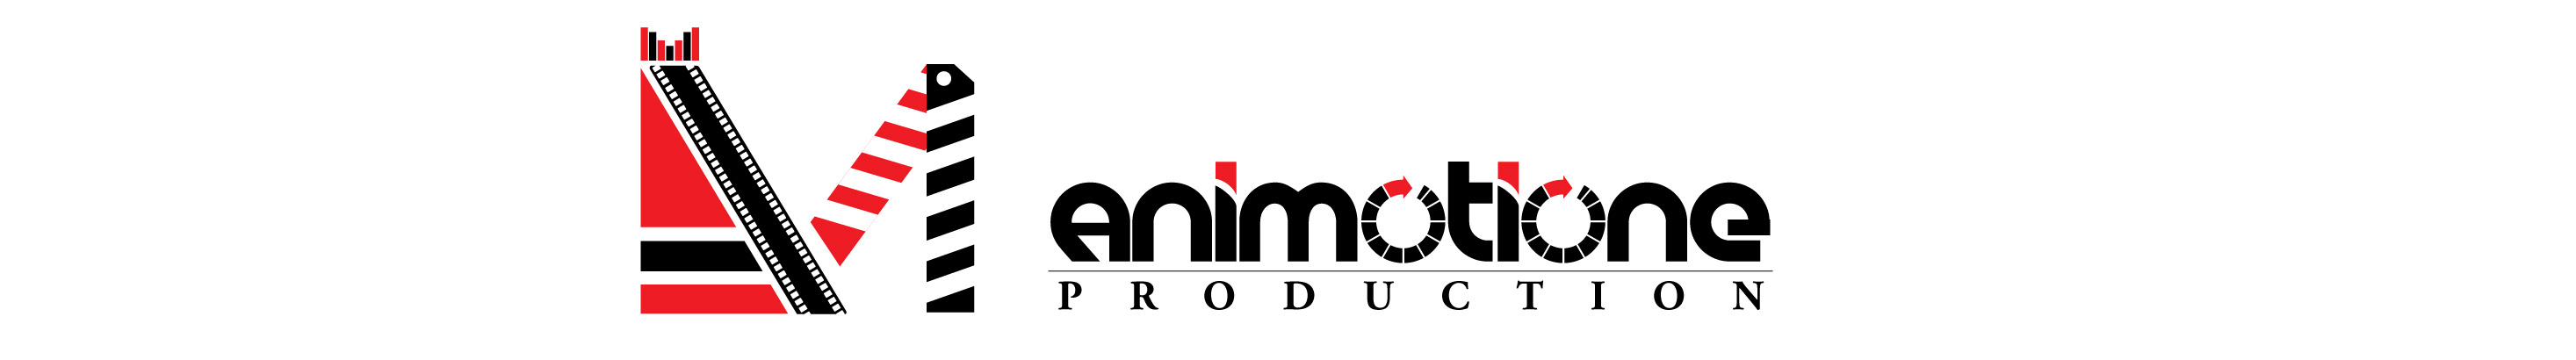 Animotione Productions profilbanner